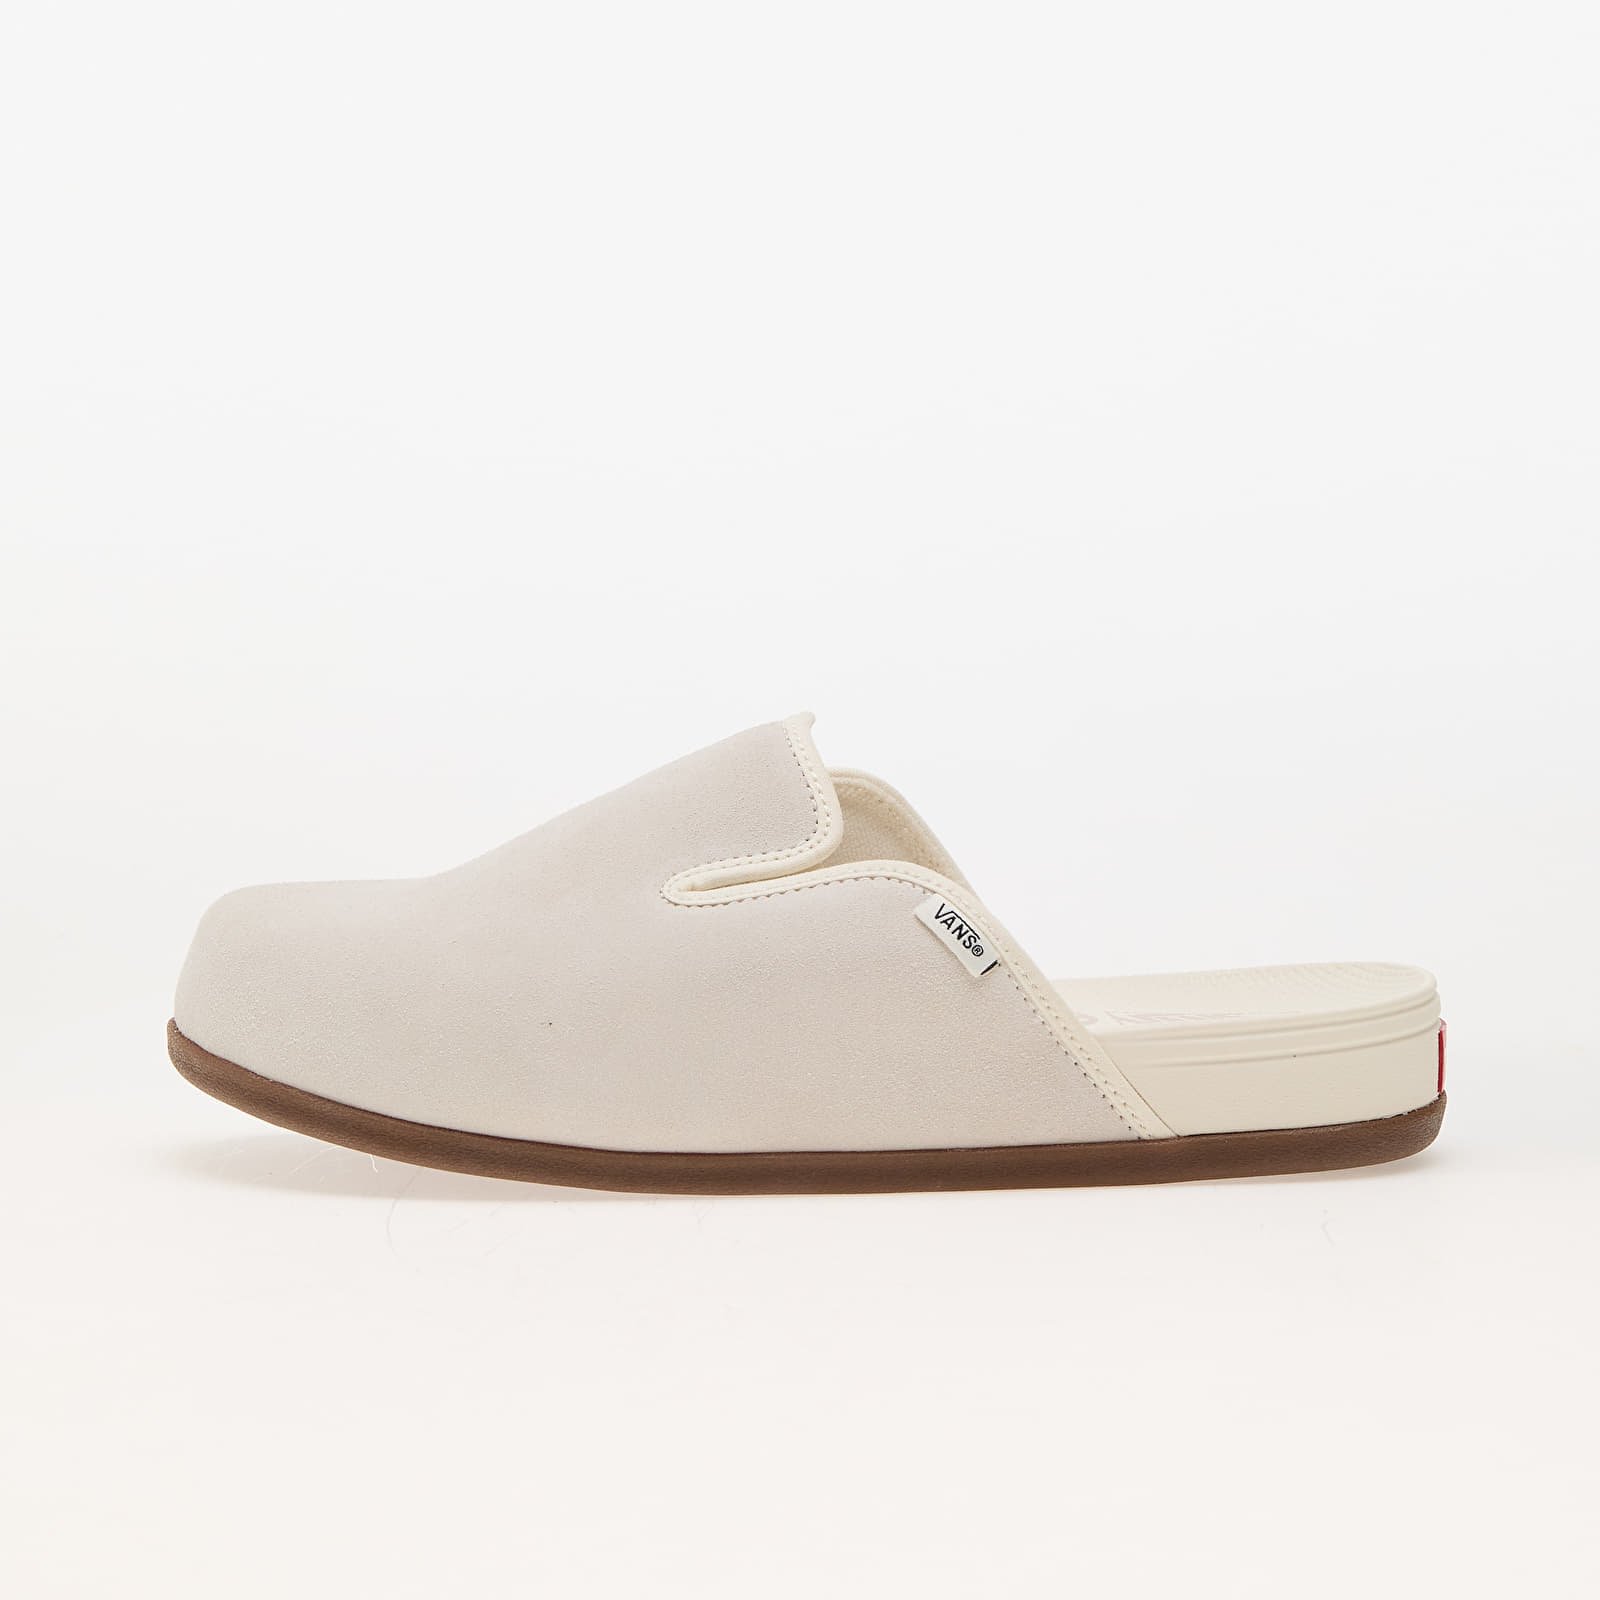 Harbor Mule Vr3 Terry Cloth White, Low-top sneakers